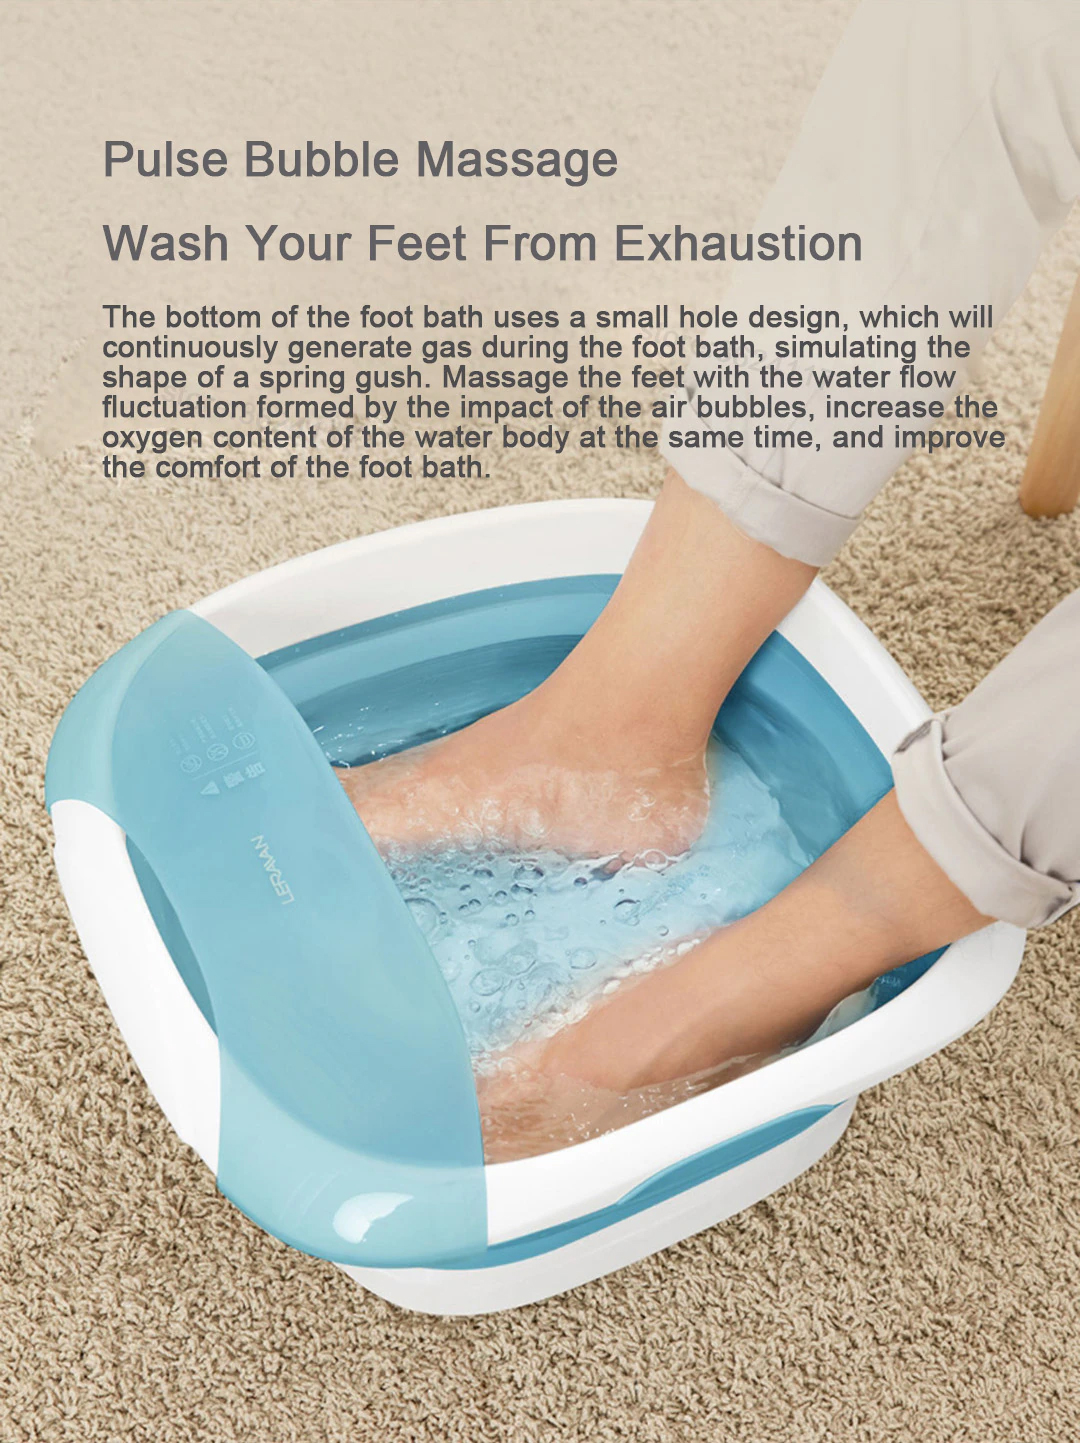 Pulse Bubble Massage Wash Your Feet From Exhaustion